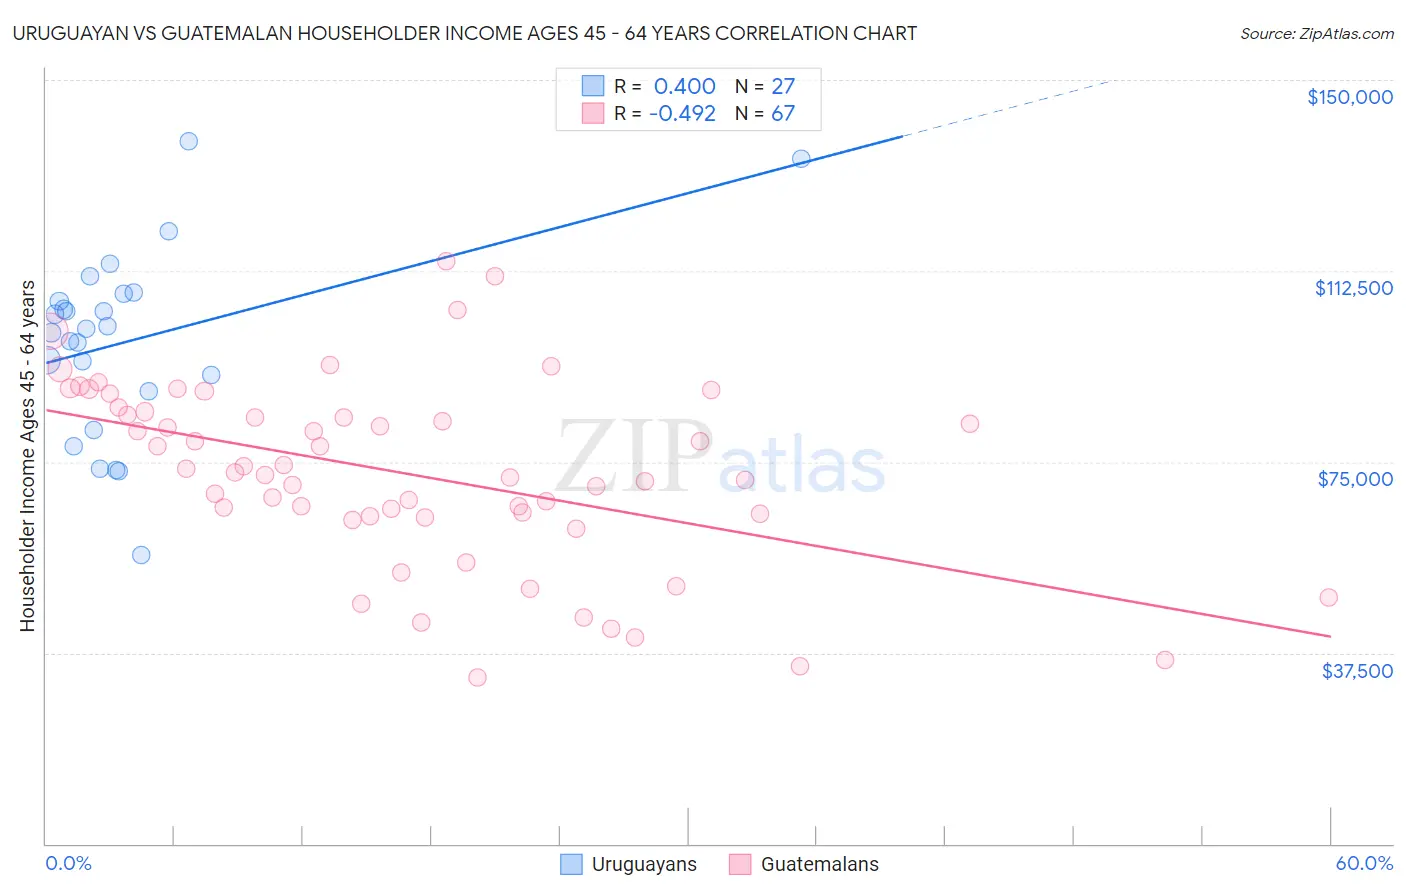 Uruguayan vs Guatemalan Householder Income Ages 45 - 64 years